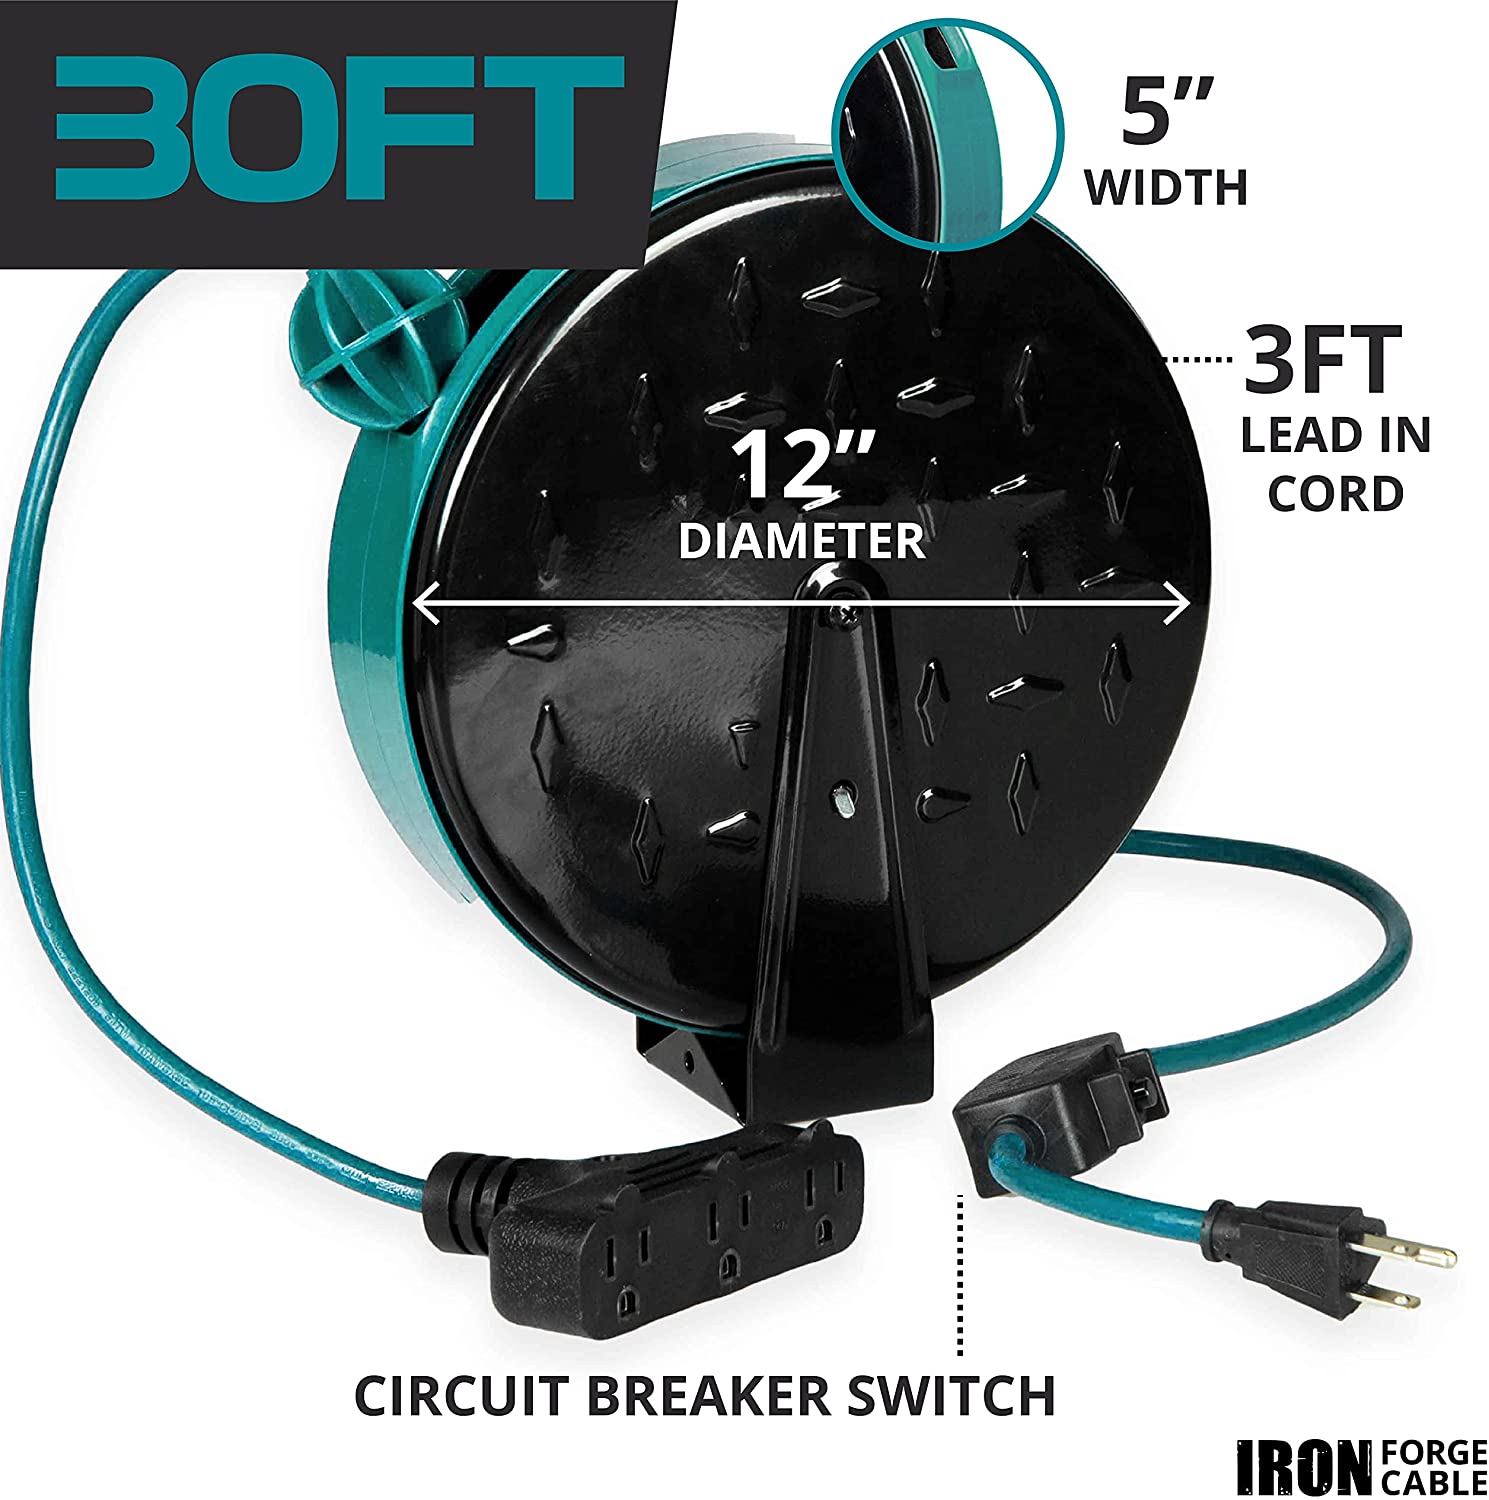 Iron Forge Cable 30ft Retractable Extension Cord Reel with Breaker Switch & 3 Electrical Power Outlets - 16/3 SJTW Durable Blue Cable - Perfect for